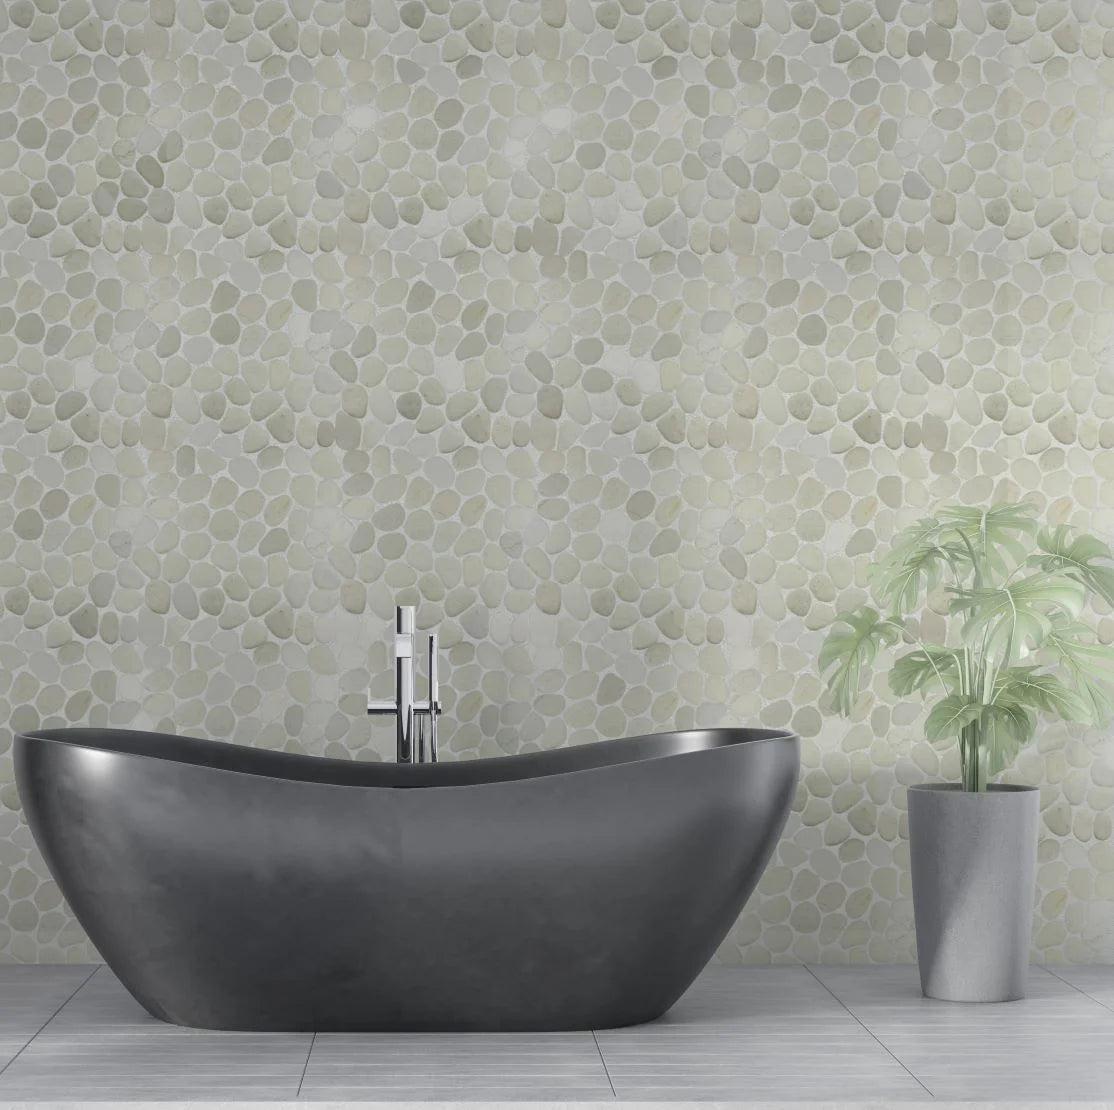 White pebble tile wall with grey bathtub and small plant in front of it